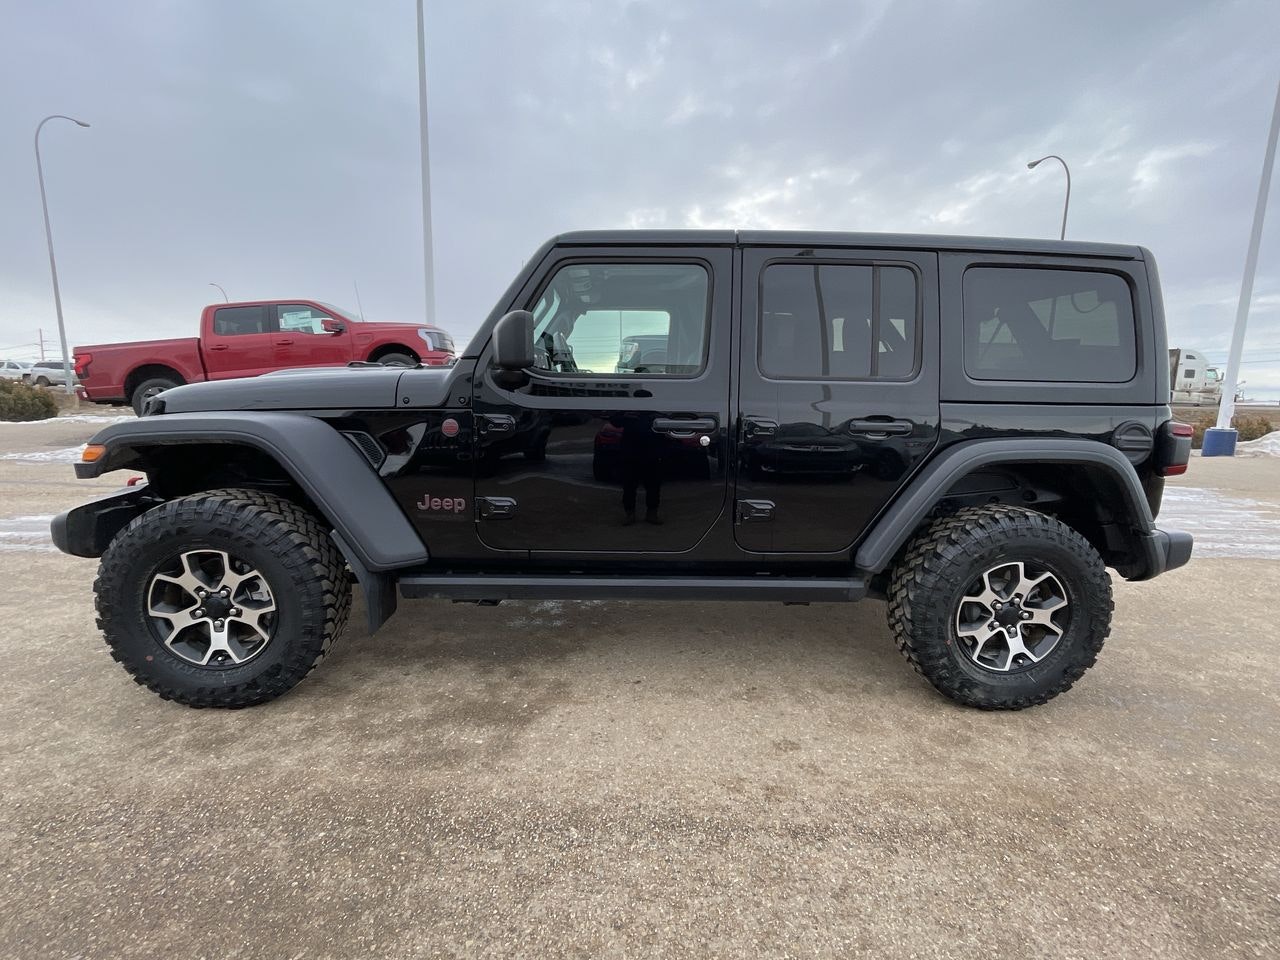 2021 Jeep Wrangler Unlimited Rubicon 8-Speed BLACK FREEDON HARD TOP COLD WEATHE (T122178A) Main Image